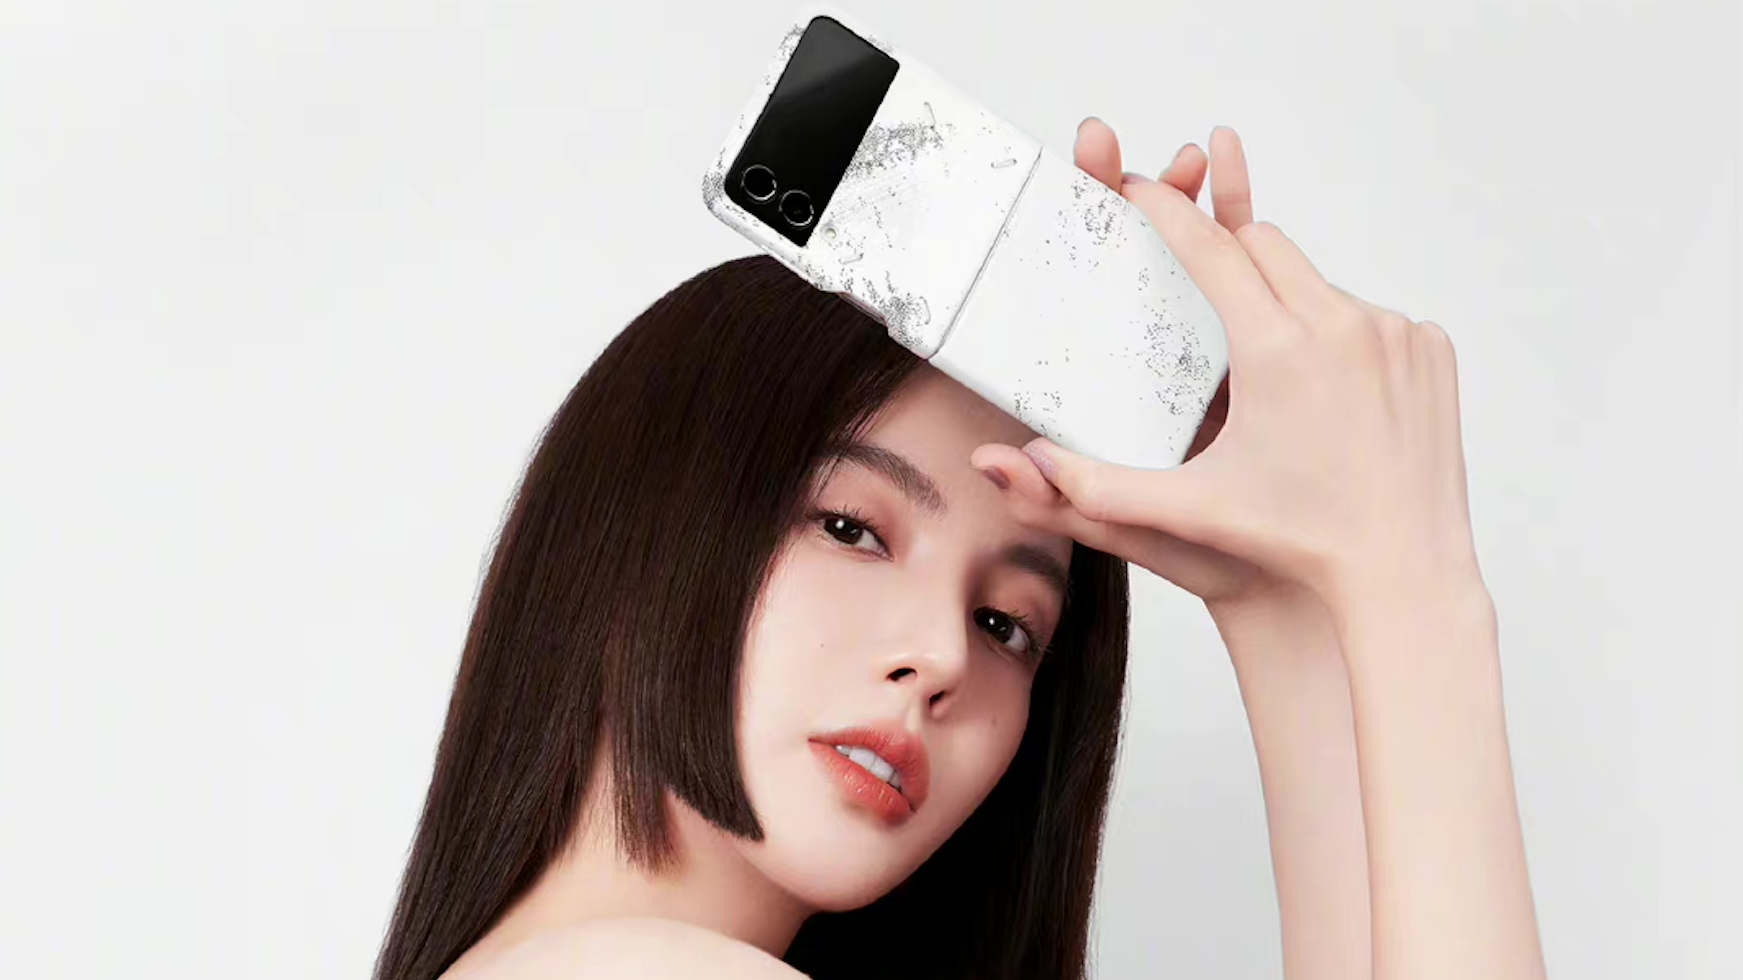 Xiaomi Partners With Daniel Arsham And Samsung With Margiela. Why Are Phone Brands Joining The Collaboration Craze?